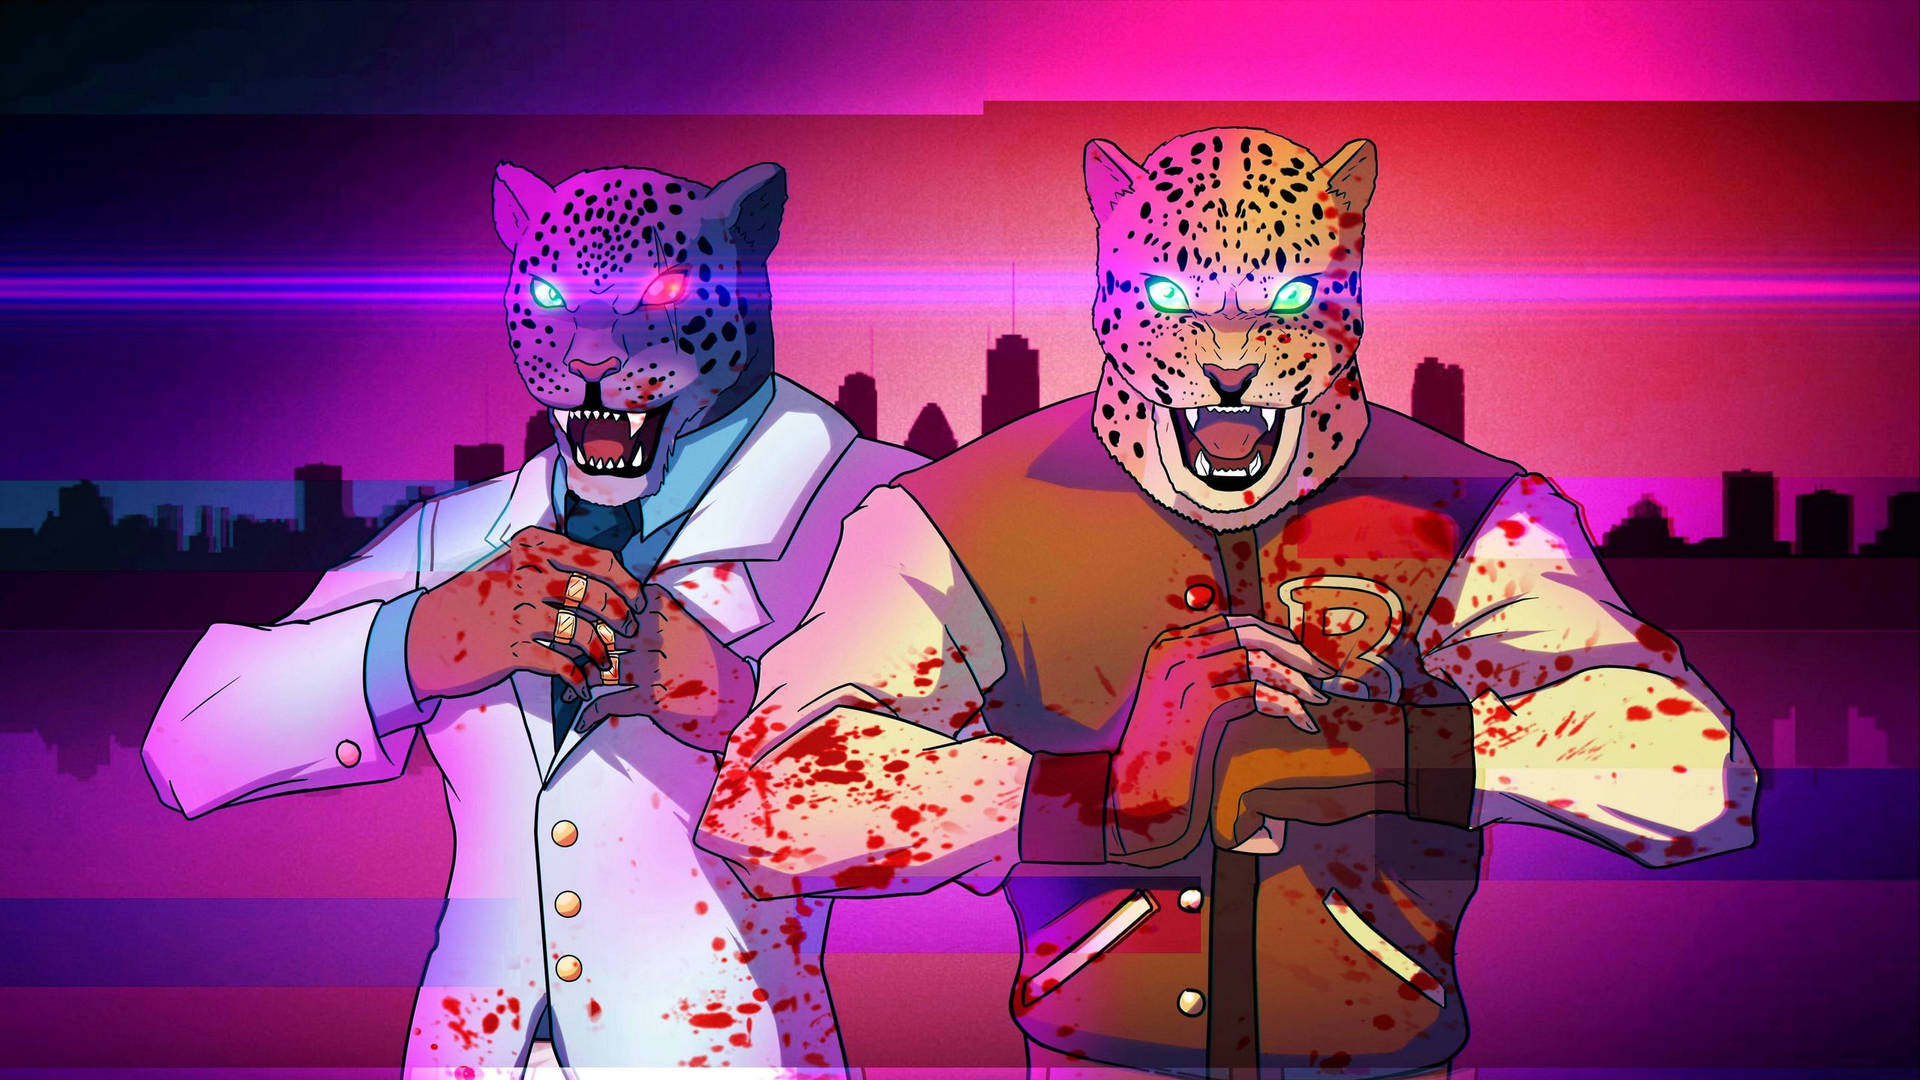 "Tiger Fists of Fury: an image from Hotline Miami" Wallpaper